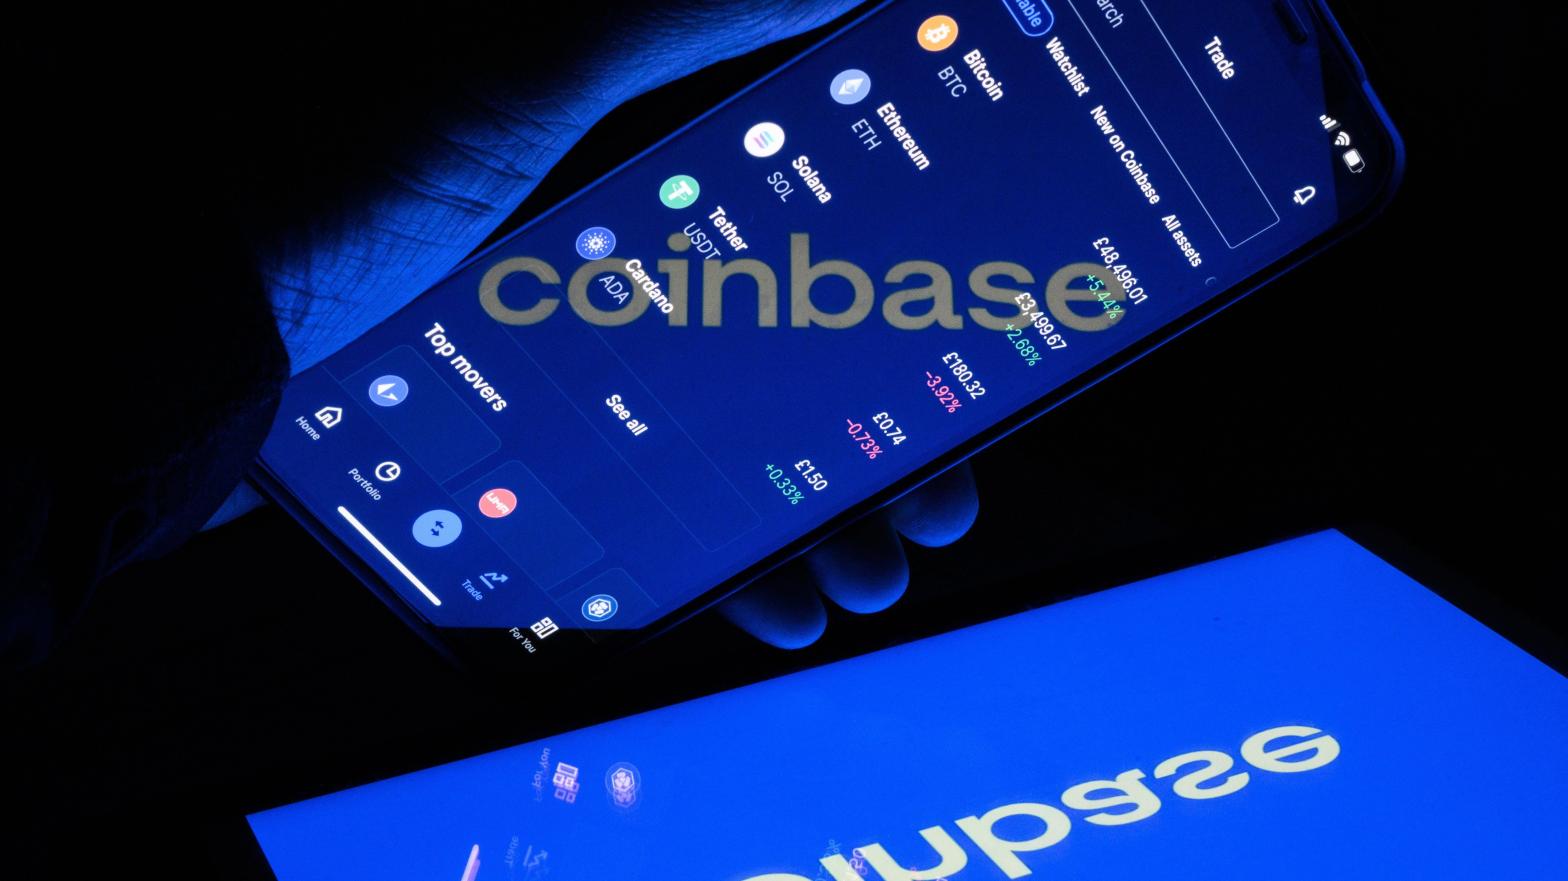 The New York Department of Financial Services was specifically investigating Coinbase's 2018-2019 compliance program as of 2021. (Image: Leon Neal, Getty Images)